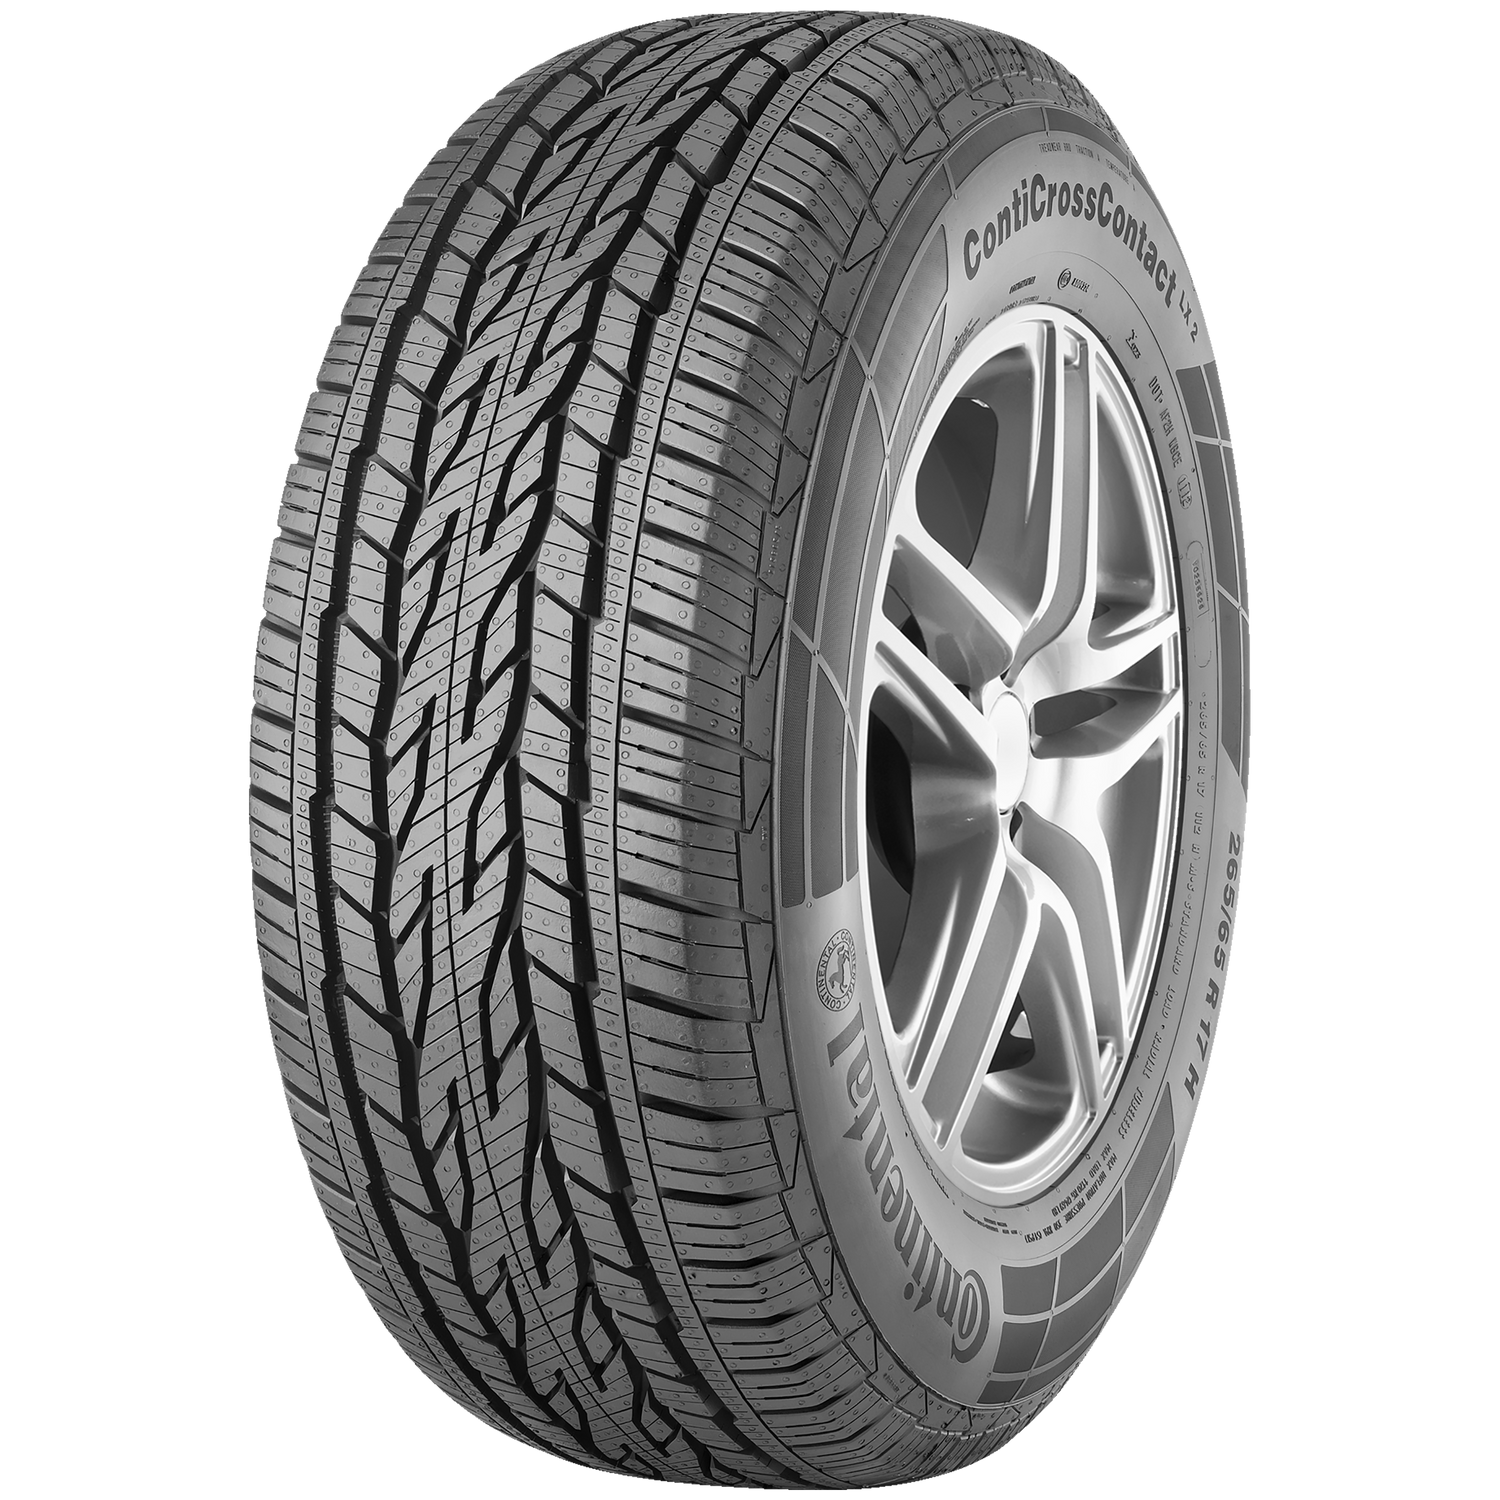 Continental ContiCrossContact LX 2 225/65R17 102H FR BSW - KolayOto